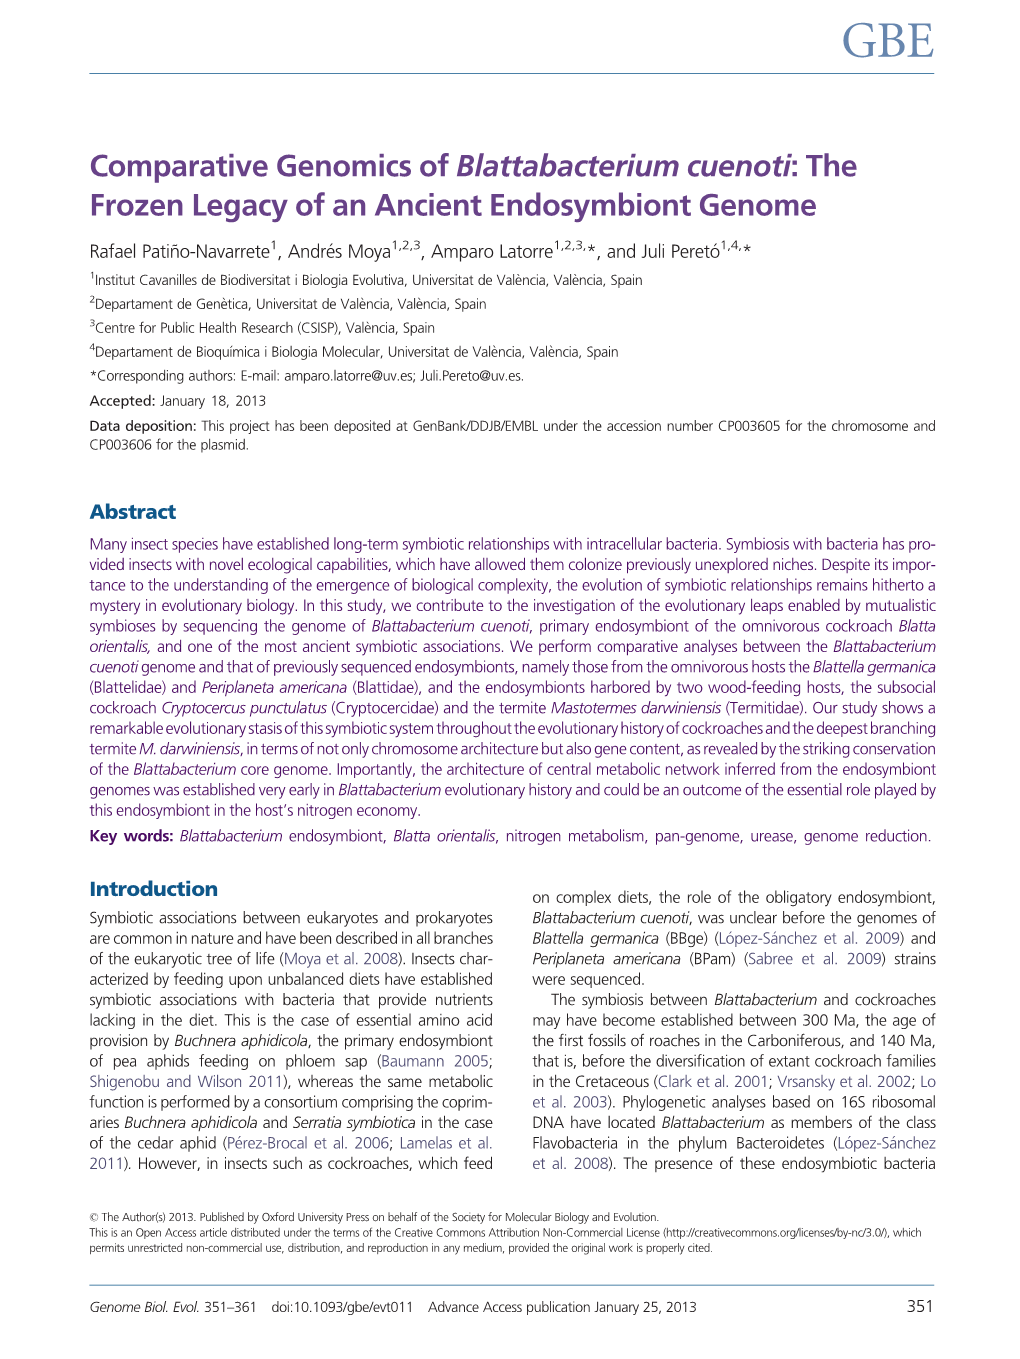 The Frozen Legacy of an Ancient Endosymbiont Genome